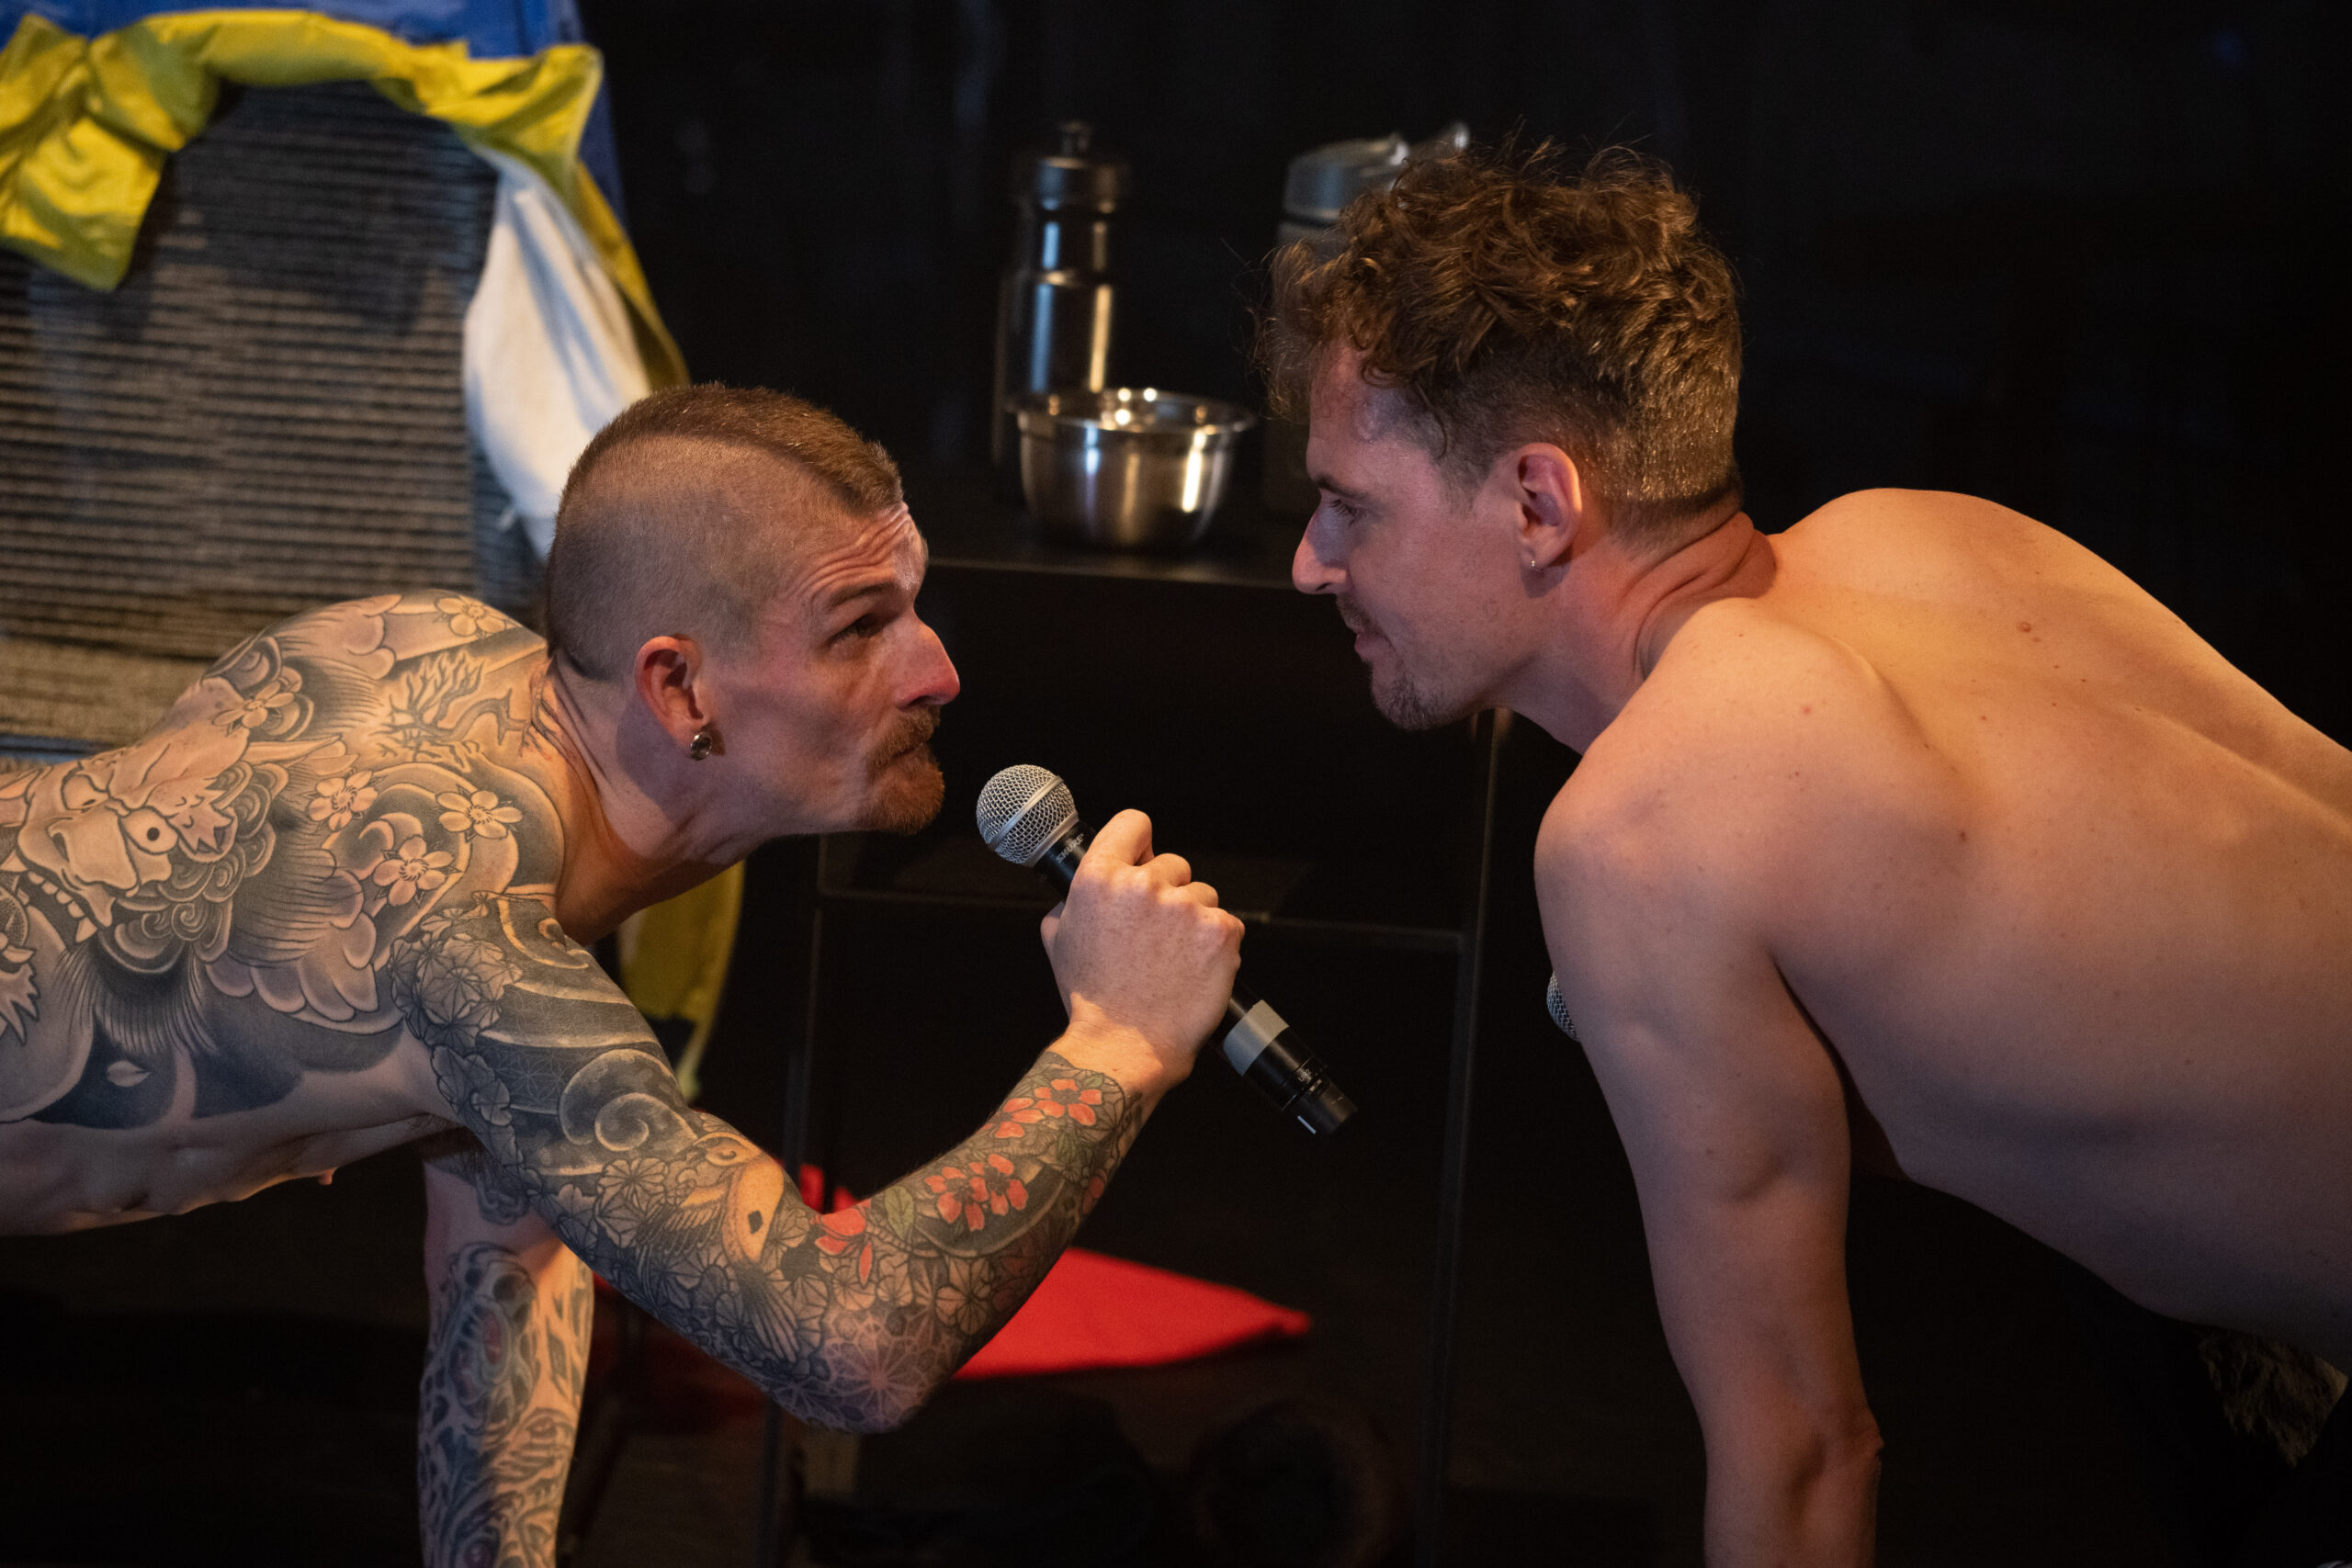 A white man with a mohawk and tattoos is on all fours holding a microphone. He faces another white man with brown hair. They are both shirtless.  